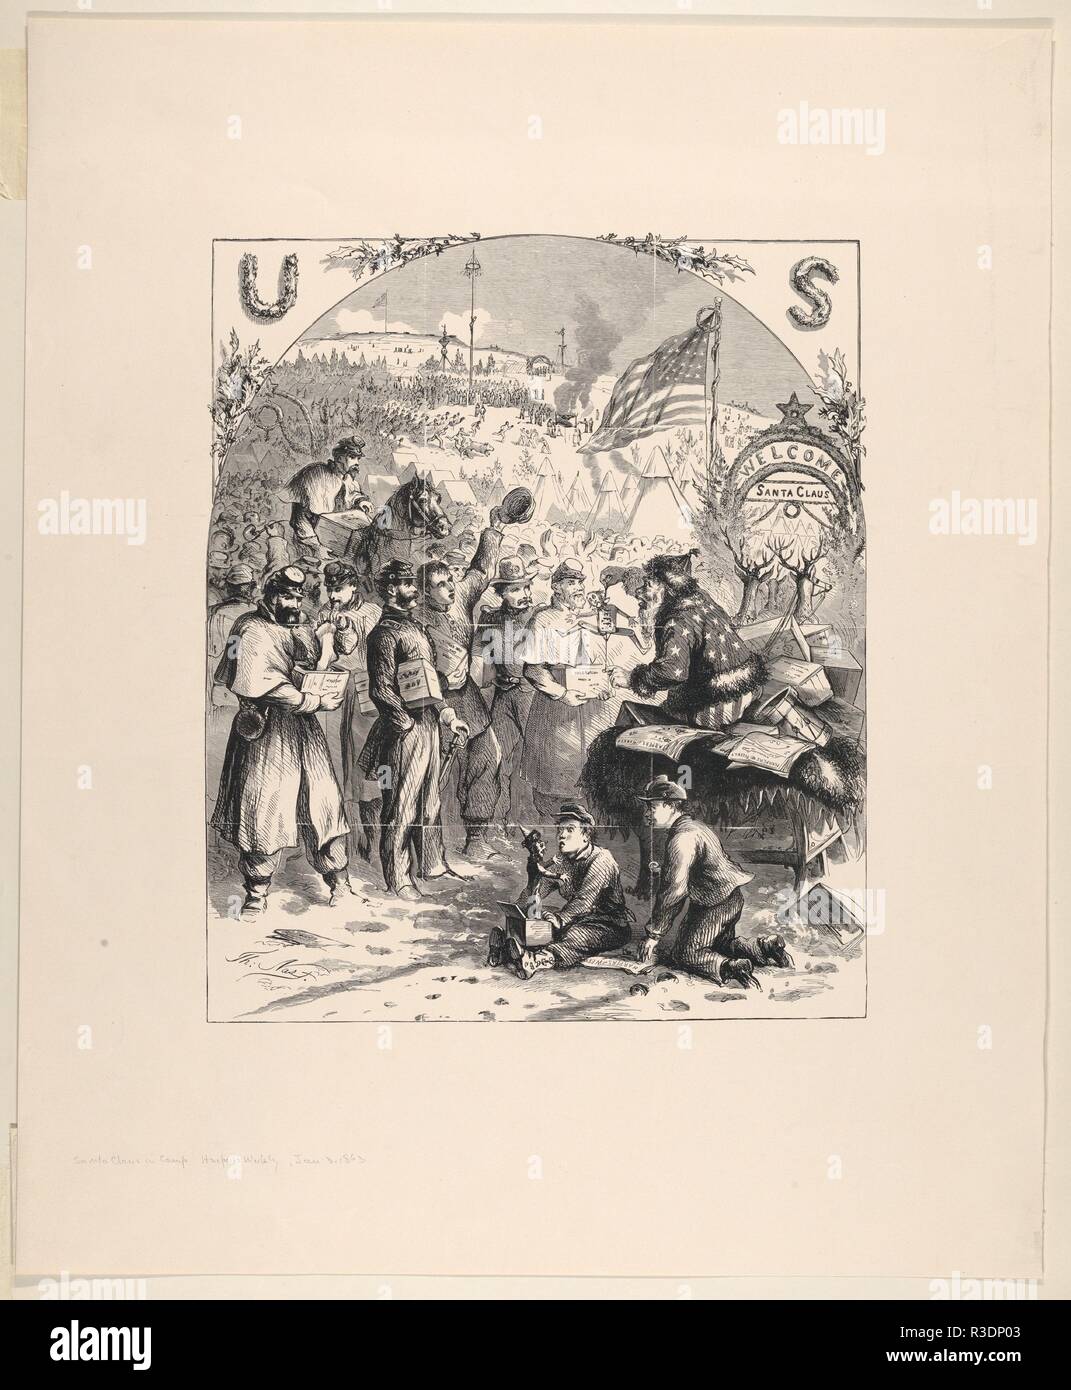 Santa Claus in Camp (published in Harper's Weekly, January 3, 1863). Artist: Thomas Nast (American (born Germany), Landau 1840-1902 Guayaquil). Dimensions: Image: 10 3/4 × 9 1/8 in. (27.3 × 23.1 cm)  Sheet: 17 1/4 × 14 1/8 in. (43.8 × 35.9 cm). Date: 1863 (?).  Nast's image was published in the 1862 Christmas issue of Harper's Weekly, during days filled with both trials for the Union and rising hope. Santa Claus has arrived by sleigh in a Union army camp to distribute gifts. This was the moment that Nast conceived and introduced our modern image of Santa Claus. Combining European traditions of Stock Photo